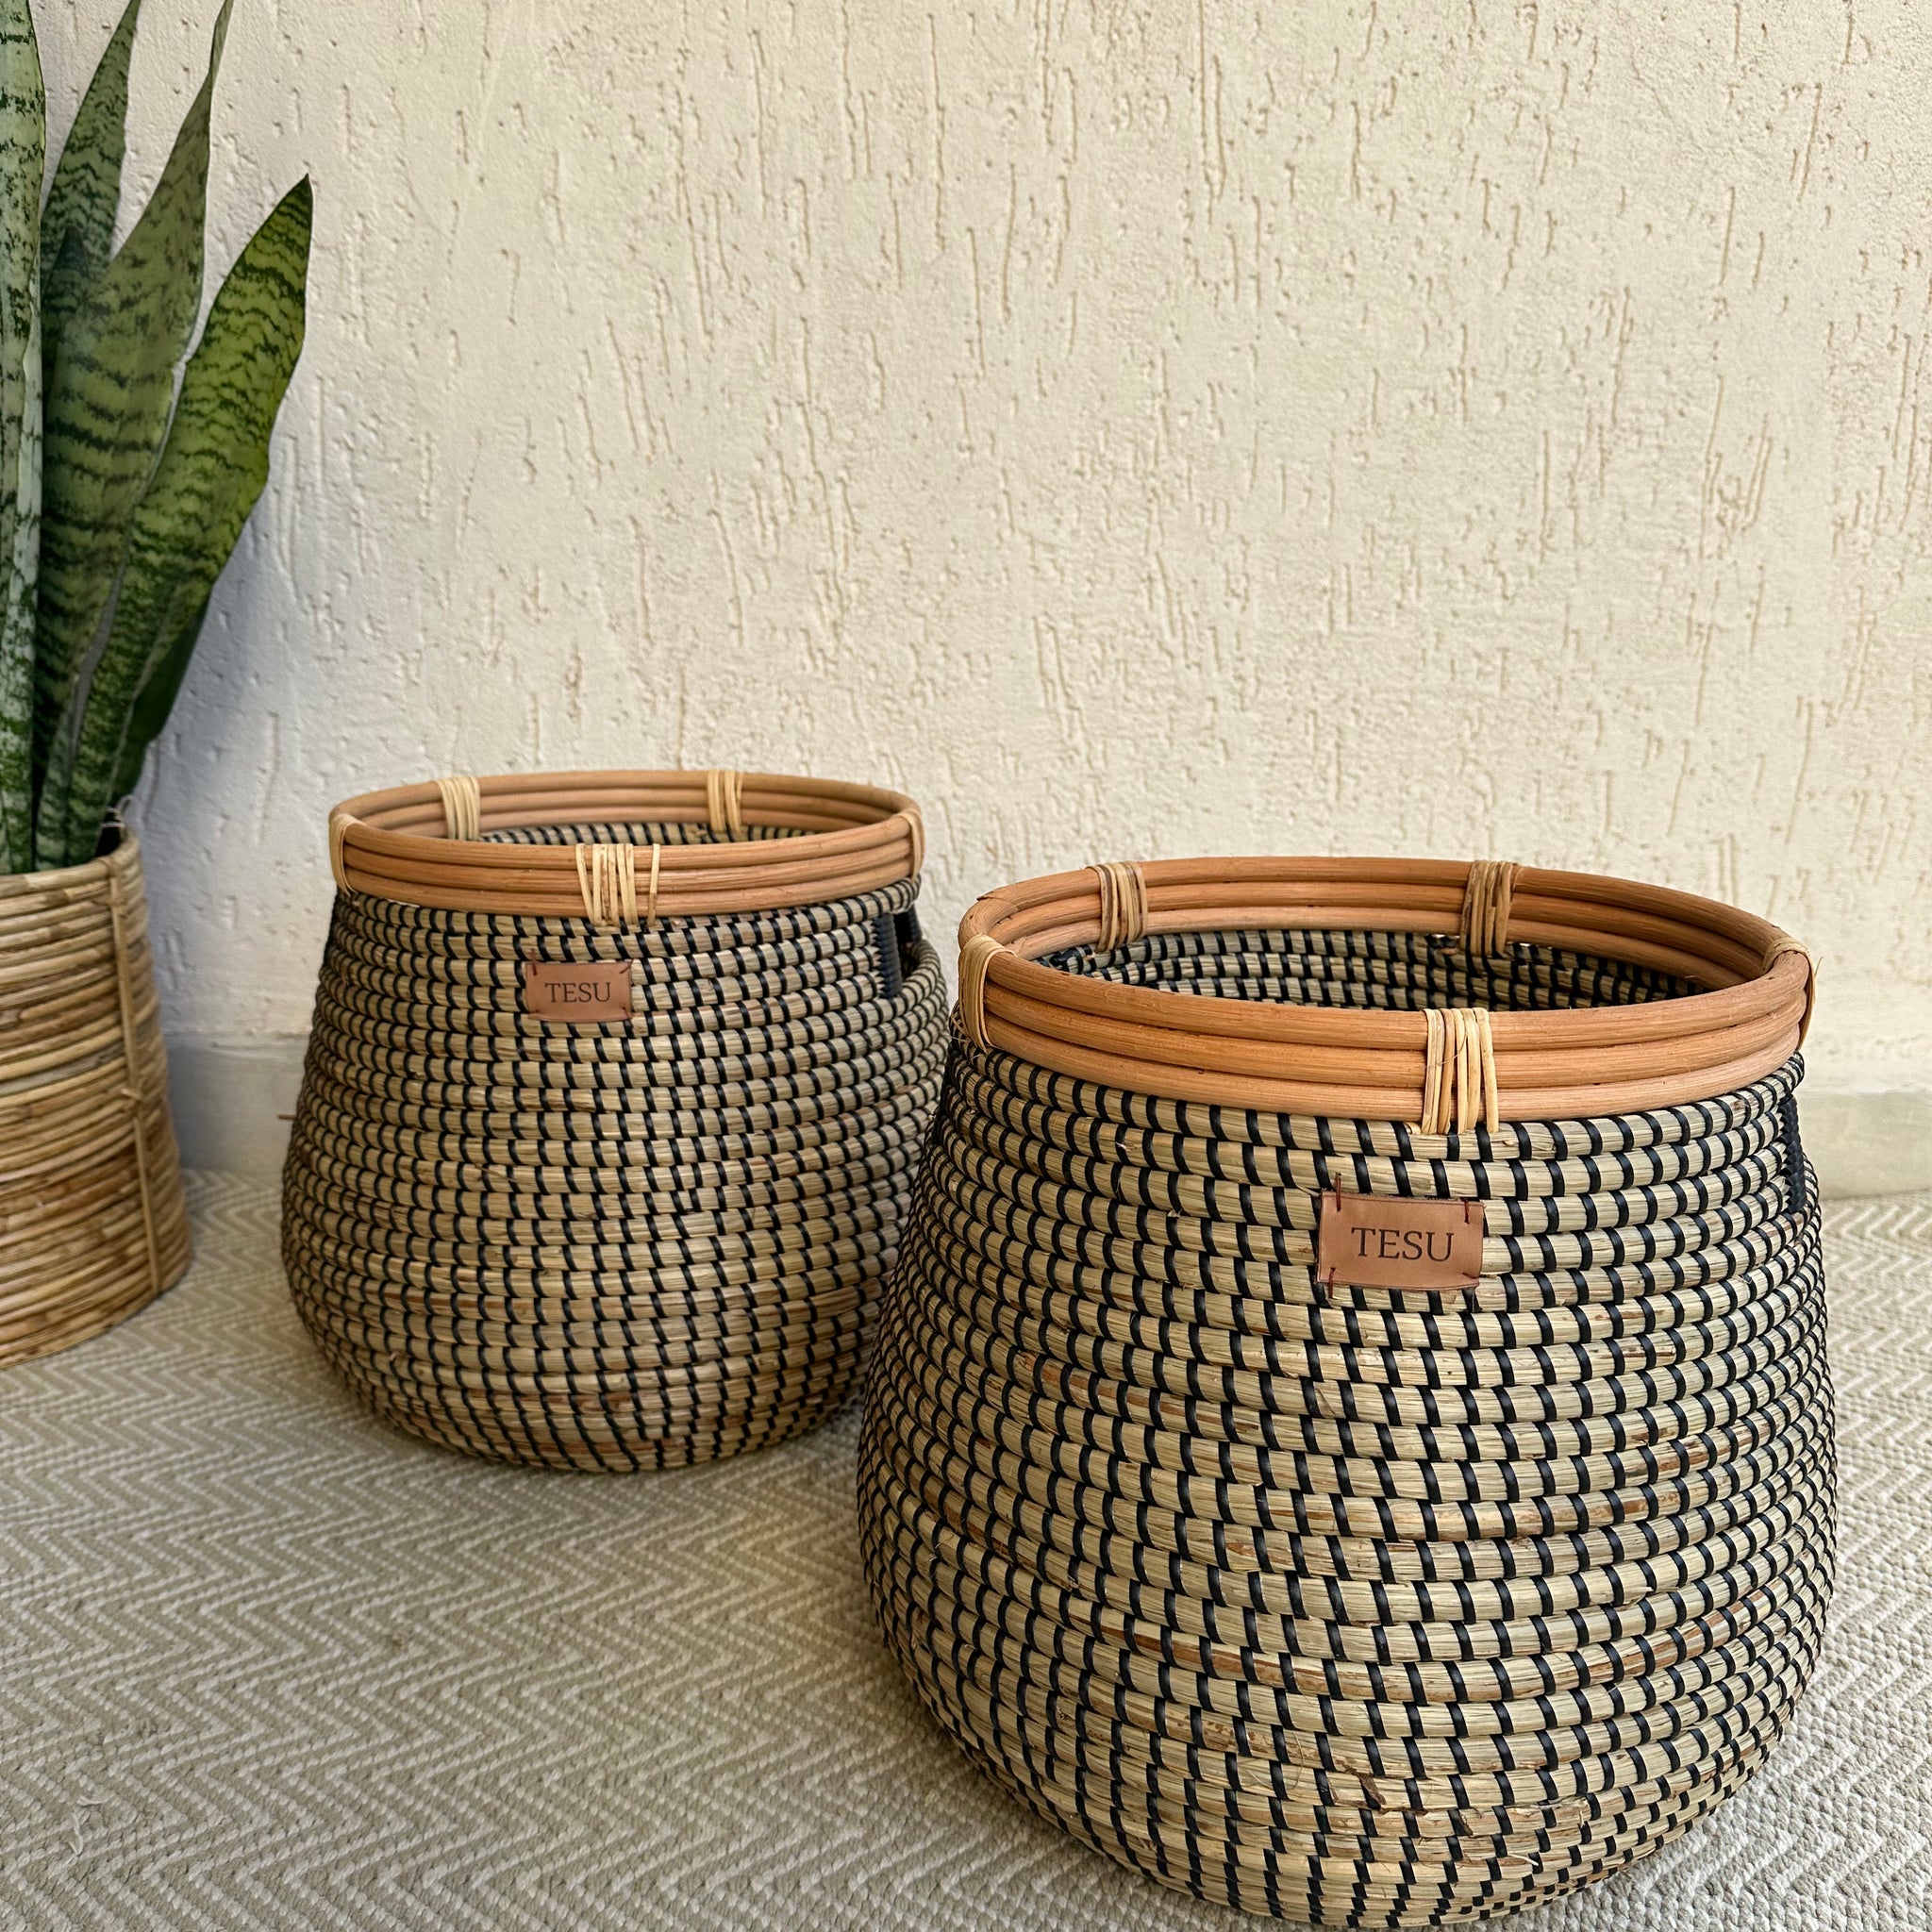 Enhance your Dream Home with our curated selection of premium wall and Home Décor items. Seagrass Plant Holder Cut Out Handles mixed with Rattan , Perfect for decorating your home, living room decor, bedroom interior touches, beautiful cover pots and much more. Its placement is very flexible which is suitable for beautifying your room. Hand-woven by our artisans from sustainable Sea grass these storage baskets are great for storing and have high aesthetic appeal. tesu